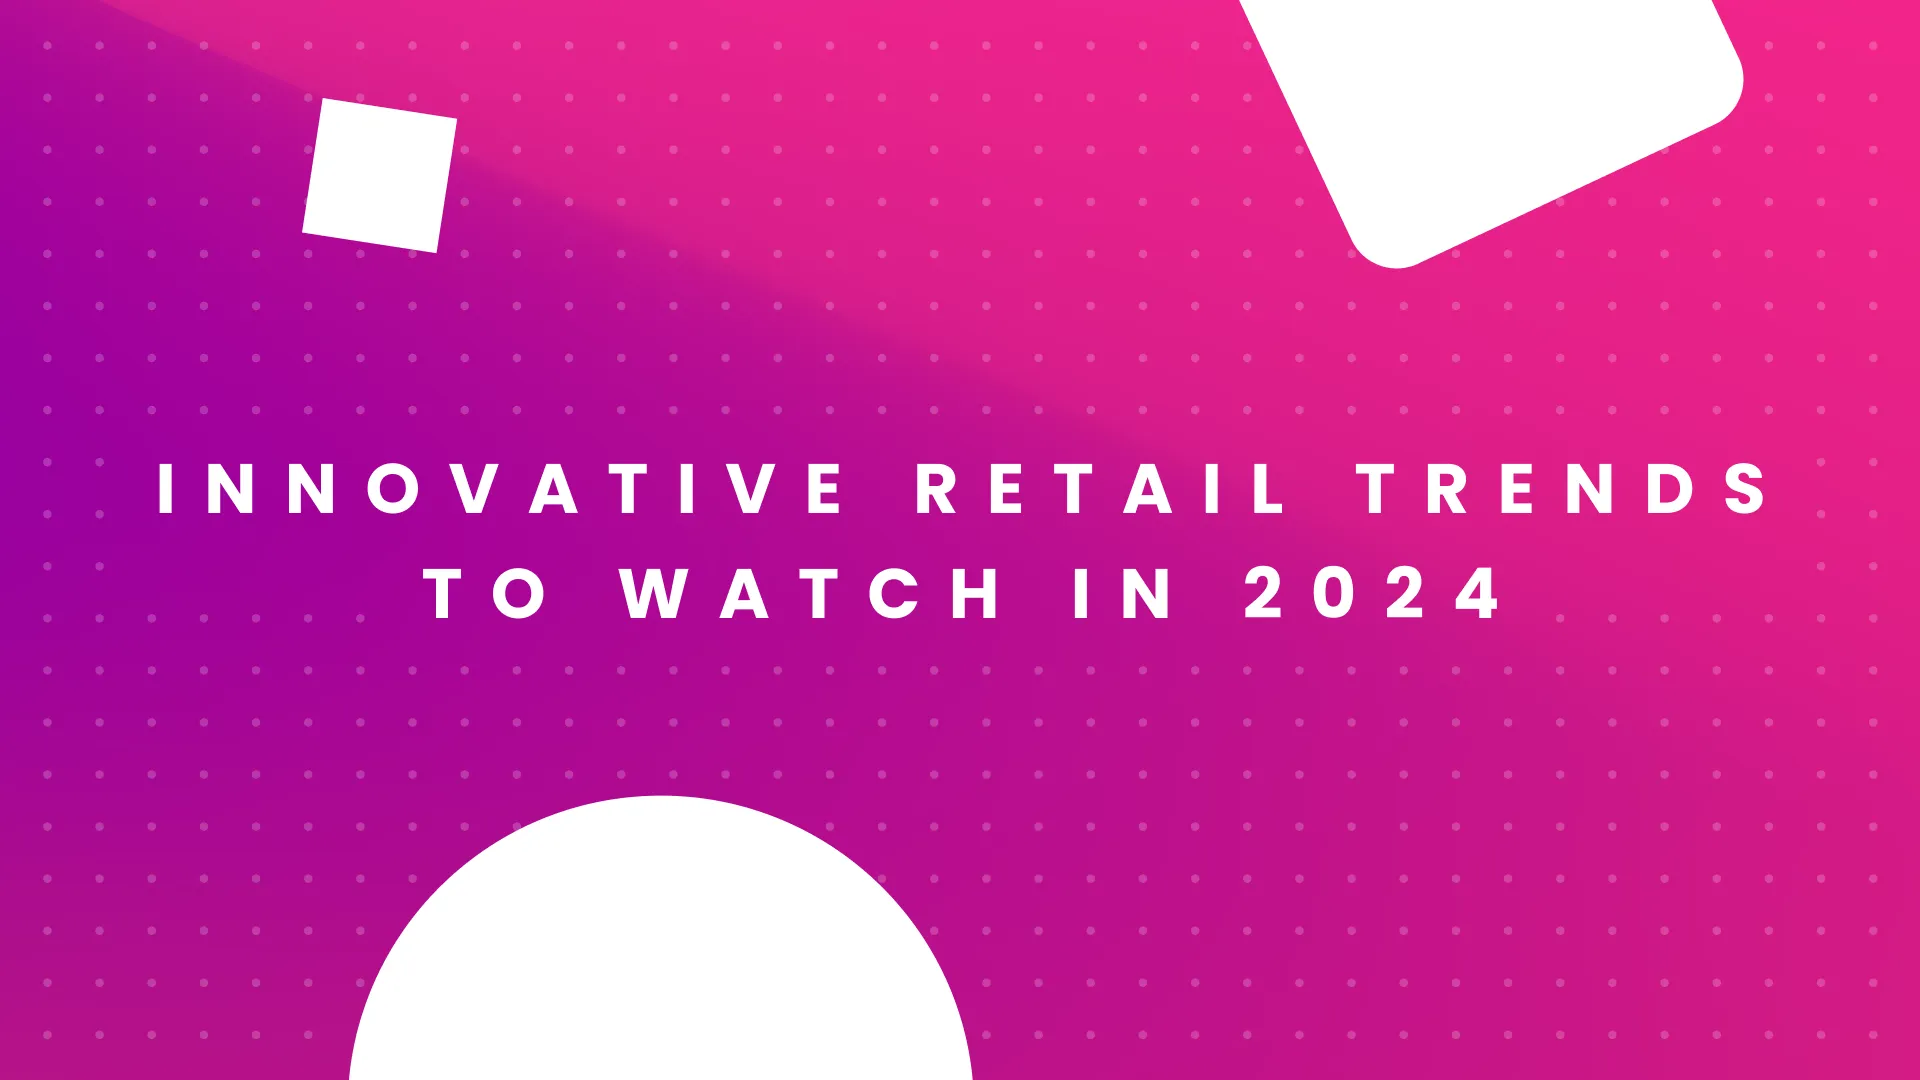 10 Innovative Retail Trends to Watch in 2024